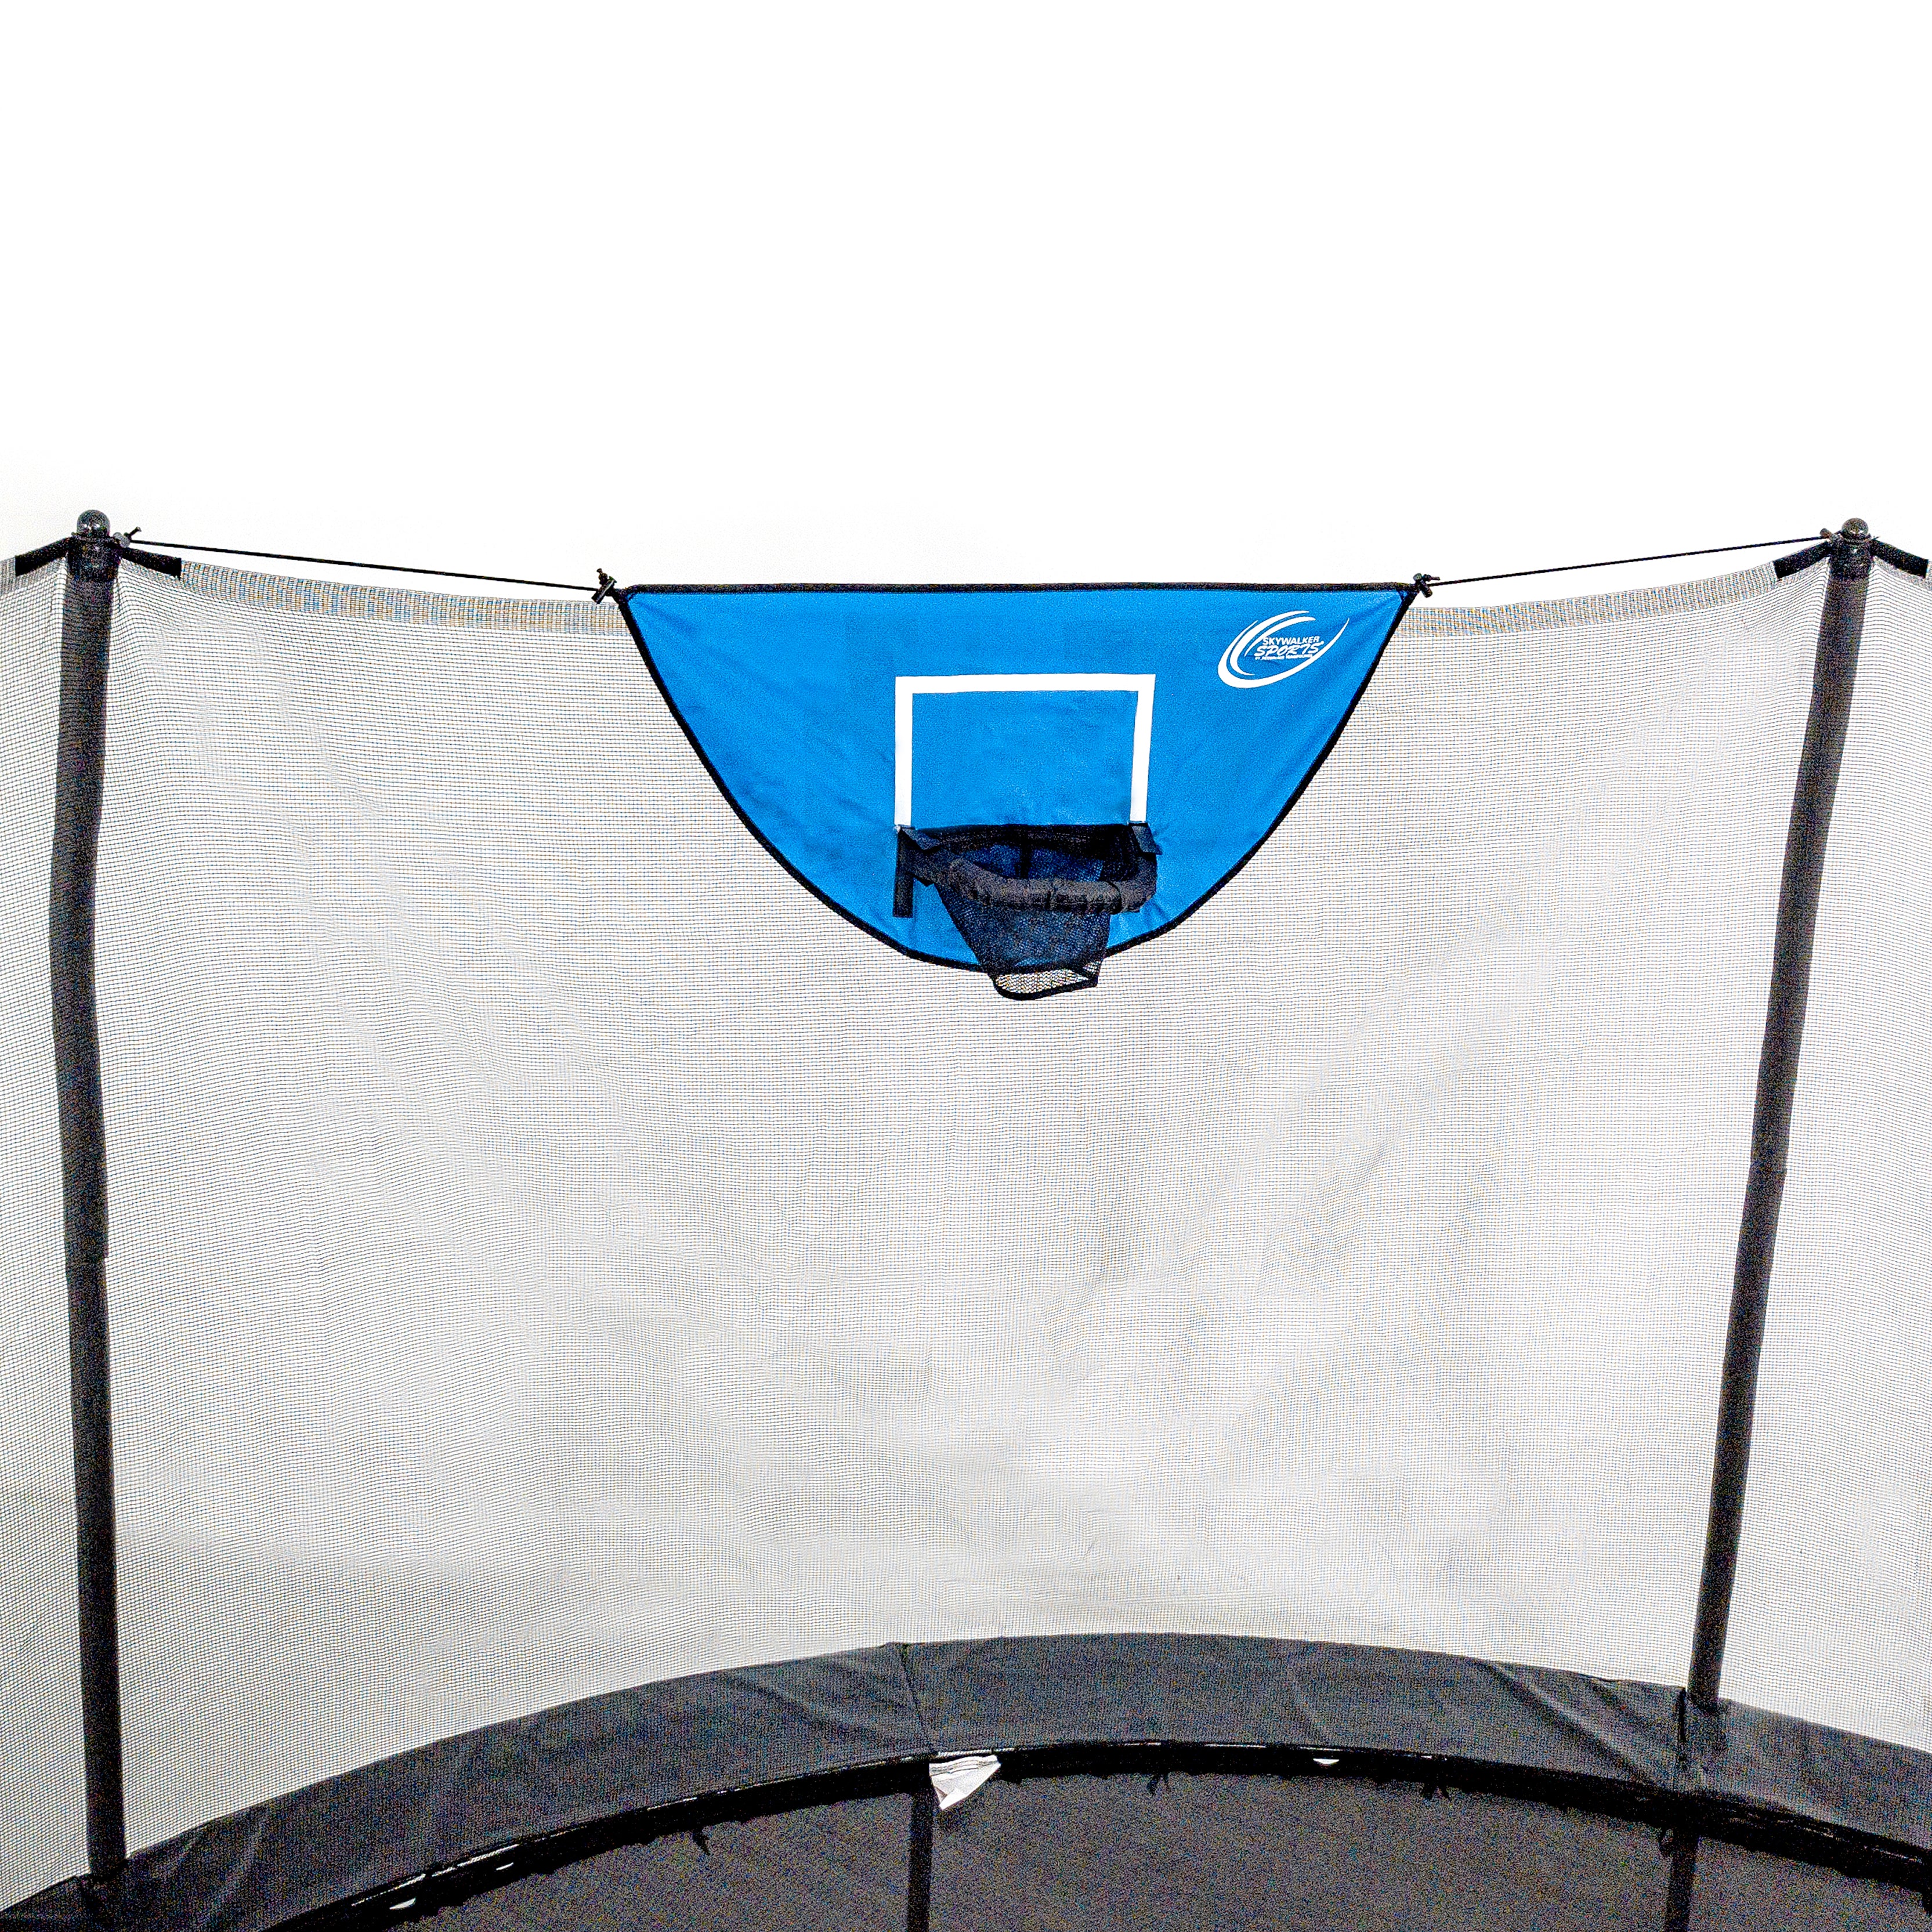 The basketball hoop attaches to the trampoline's enclosure poles. 